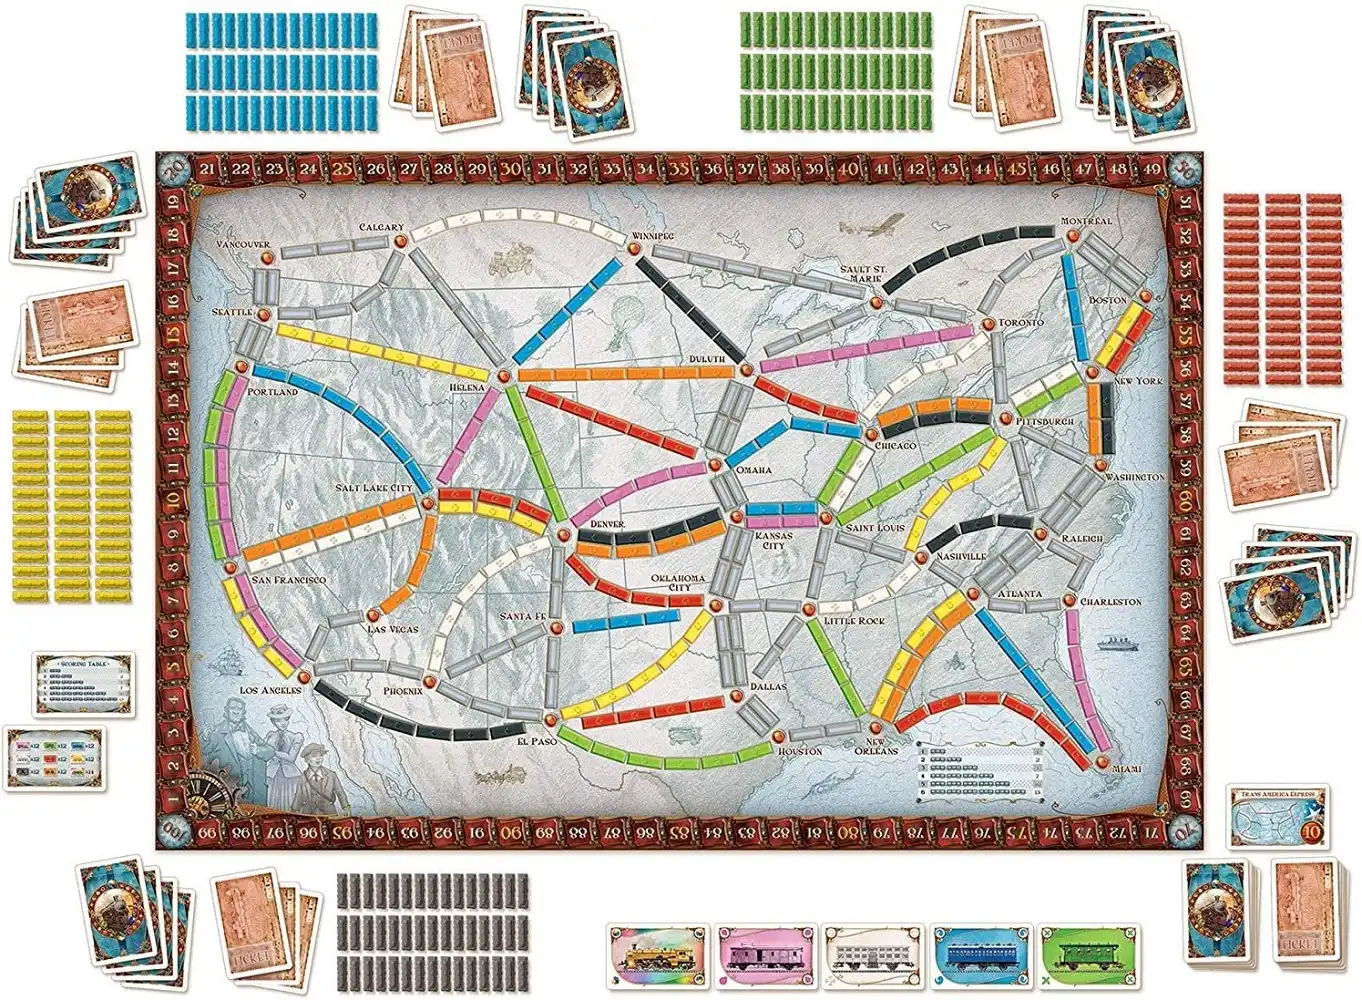 Ticket to Ride (2004) board game components | Source: Days of Wonder